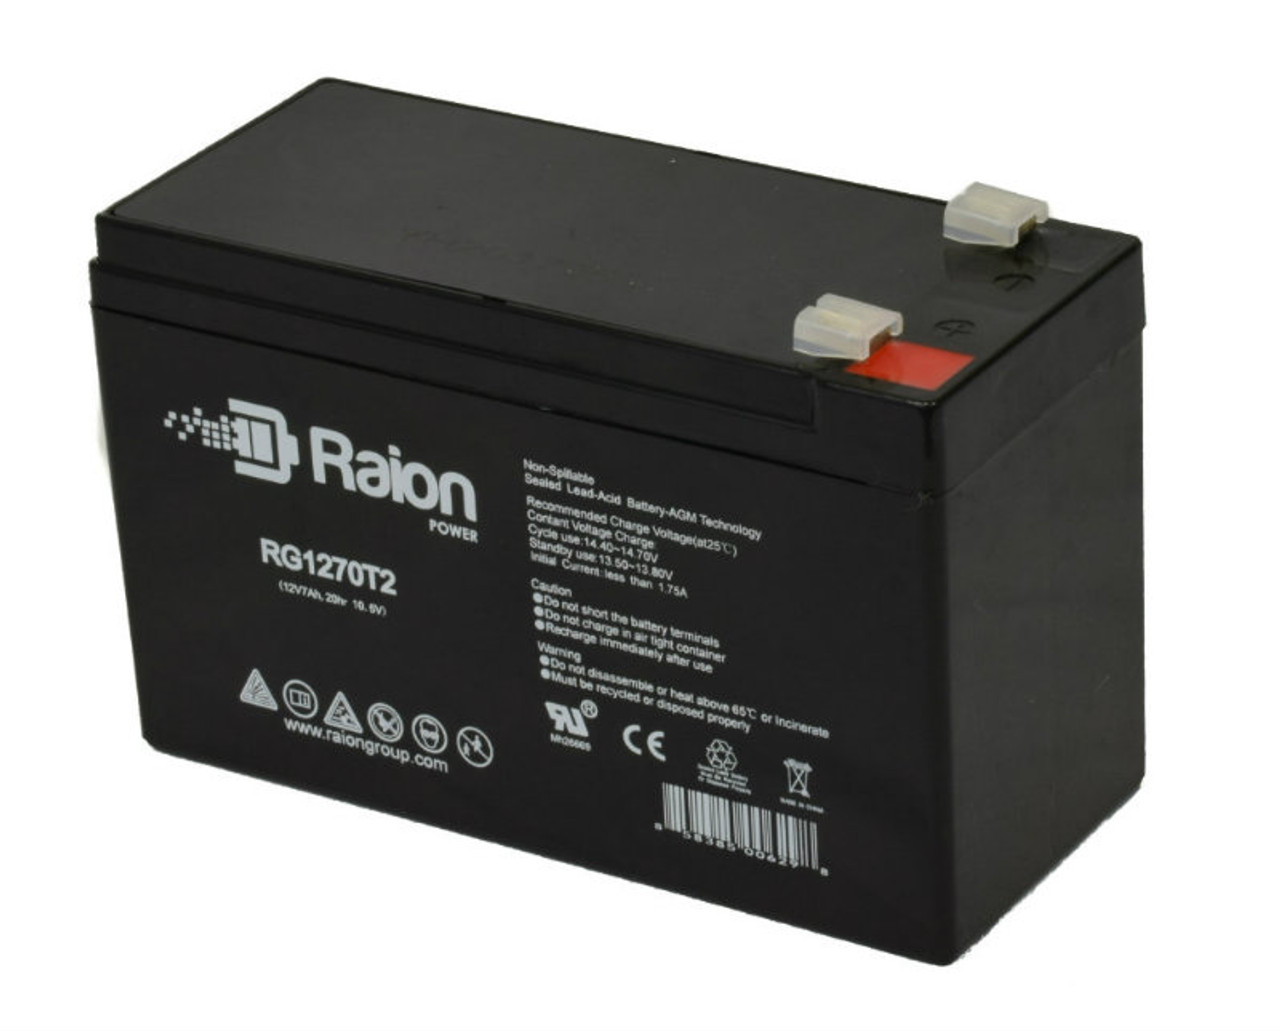 Raion Power Replacement RG1270T1 Battery for Bruno Elite Outdoor Straight Stairlift SRE-2010E